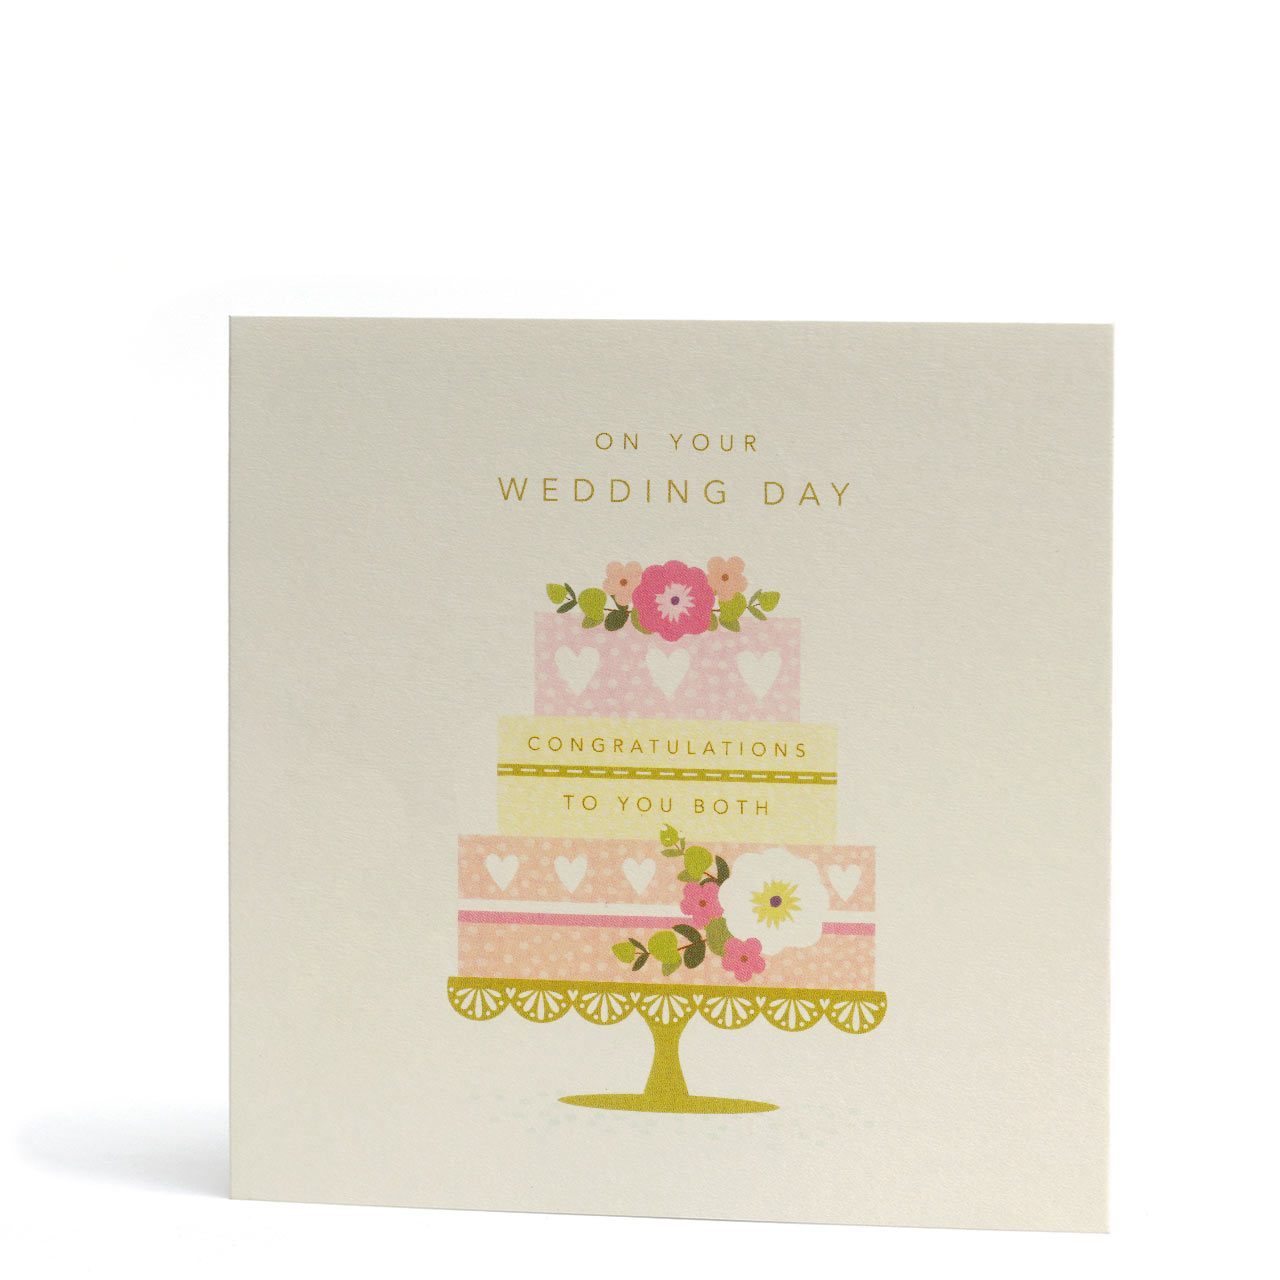 On Your Wedding Day Cake Card